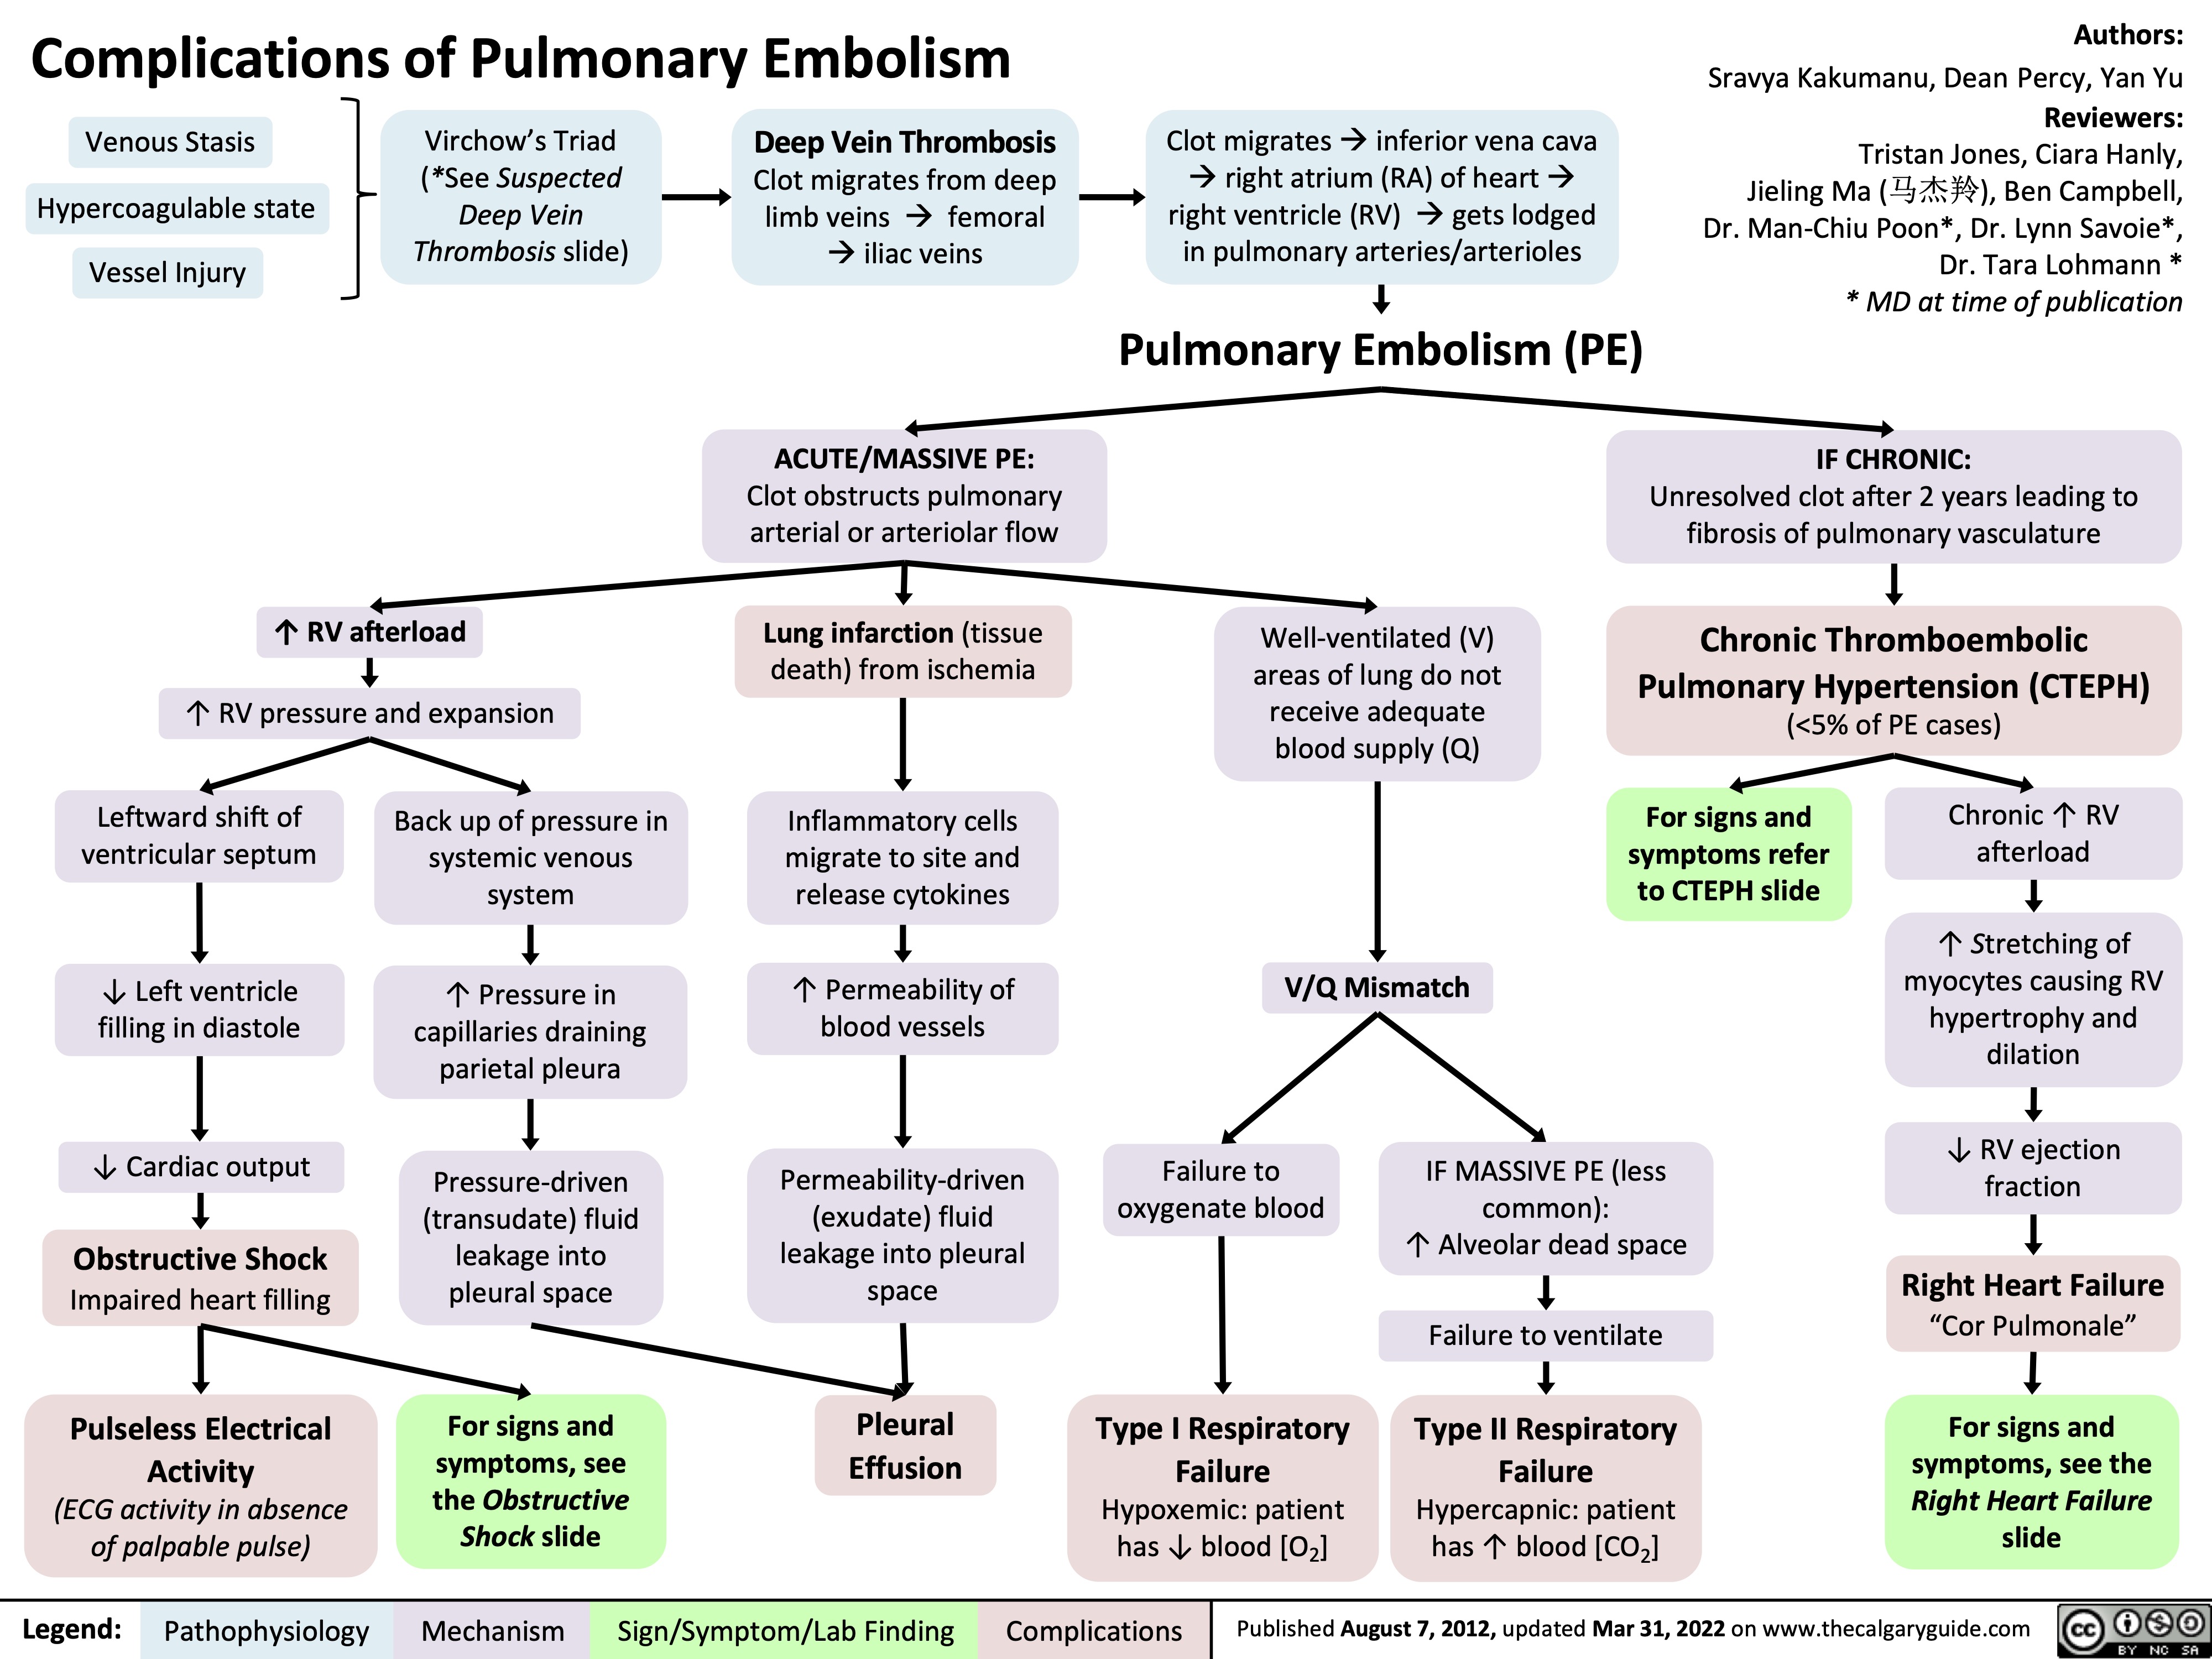 Complications of Pulmonary Embolism
Authors:
Sravya Kakumanu, Dean Percy, Yan Yu
Reviewers:
Tristan Jones, Ciara Hanly, Jieling Ma (马杰羚), Ben Campbell, Dr. Man-Chiu Poon*, Dr. Lynn Savoie*, Dr. Tara Lohmann * * MD at time of publication
IF CHRONIC:
Unresolved clot after 2 years leading to fibrosis of pulmonary vasculature
Chronic Thromboembolic Pulmonary Hypertension (CTEPH)
(<5% of PE cases)
     Venous Stasis Hypercoagulable state
Vessel Injury
Virchow’s Triad (*See Suspected Deep Vein Thrombosis slide)
Deep Vein Thrombosis
Clot migrates from deep limb veins à femoral àiliac veins
ACUTE/MASSIVE PE:
Clot obstructs pulmonary arterial or arteriolar flow
Lung infarction (tissue death) from ischemia
Inflammatory cells migrate to site and release cytokines
↑ Permeability of blood vessels
Permeability-driven (exudate) fluid leakage into pleural space
Pleural Effusion
Clot migratesàinferior vena cava àright atrium (RA) of heartà right ventricle (RV) à gets lodged in pulmonary arteries/arterioles
Pulmonary Embolism (PE)
           ↑ RV afterload
↑ RV pressure and expansion
Well-ventilated (V) areas of lung do not receive adequate blood supply (Q)
V/Q Mismatch
           Leftward shift of ventricular septum
↓ Left ventricle filling in diastole
↓ Cardiac output
Obstructive Shock
Impaired heart filling
Pulseless Electrical Activity
(ECG activity in absence of palpable pulse)
Back up of pressure in systemic venous system
↑ Pressure in capillaries draining parietal pleura
Pressure-driven (transudate) fluid leakage into pleural space
For signs and symptoms, see the Obstructive Shock slide
For signs and symptoms refer to CTEPH slide
Chronic ↑ RV afterload
↑ Stretching of myocytes causing RV hypertrophy and dilation
↓ RV ejection fraction
Right Heart Failure
“Cor Pulmonale”
For signs and symptoms, see the Right Heart Failure slide
               Failure to oxygenate blood
Type I Respiratory Failure
Hypoxemic: patient has ↓ blood [O2]
IF MASSIVE PE (less common):
↑ Alveolar dead space
Failure to ventilate
Type II Respiratory Failure Hypercapnic: patient has ↑ blood [CO2]
             Legend:
 Pathophysiology
Mechanism
Sign/Symptom/Lab Finding
 Complications
 Published August 7, 2012, updated Mar 31, 2022 on www.thecalgaryguide.com
   